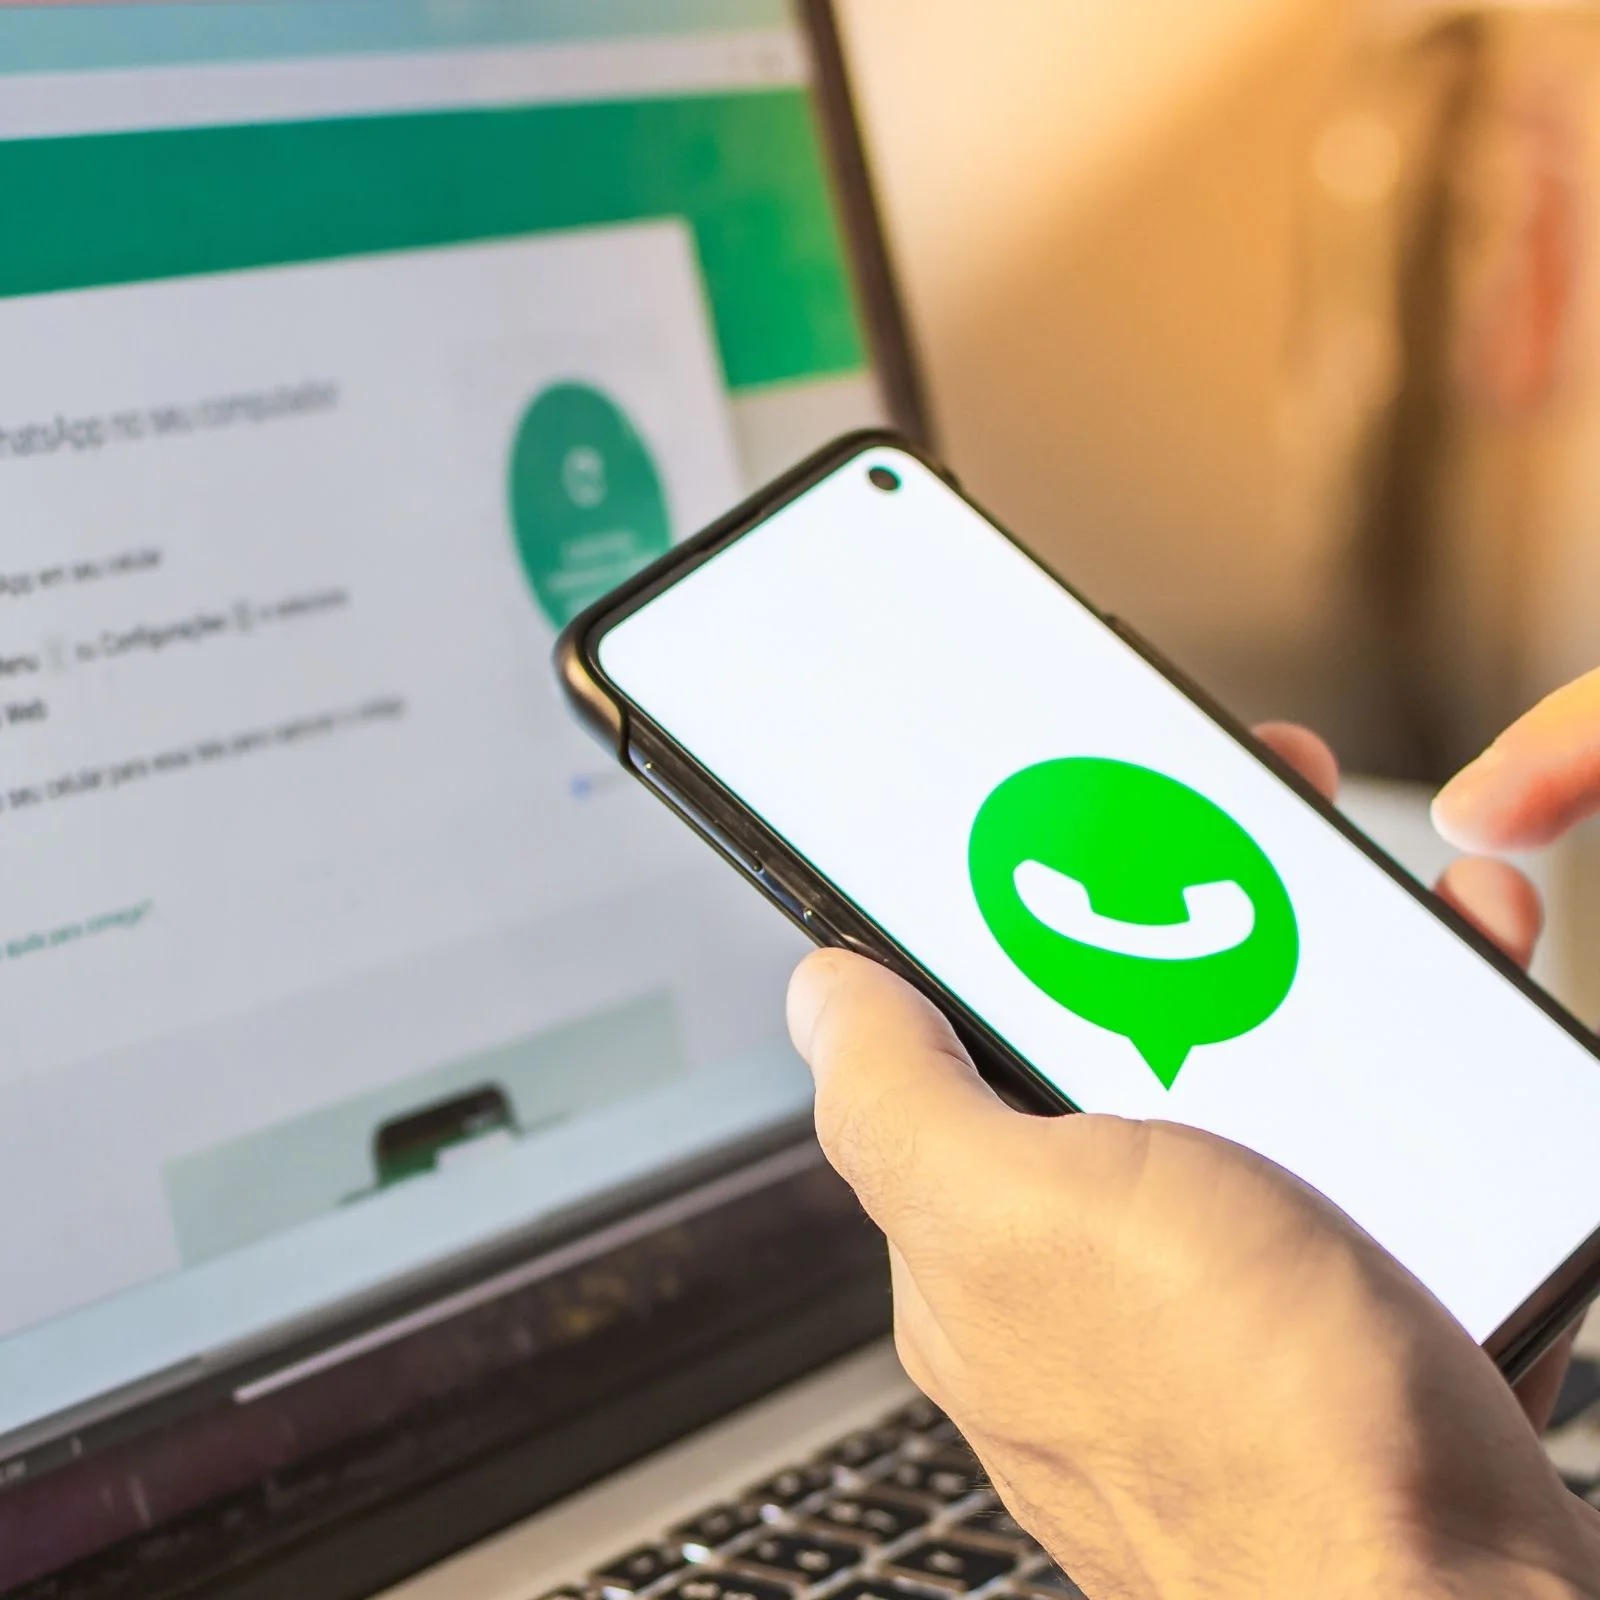 WhatsApp is bringing a big update to the profile: now you can control this thing